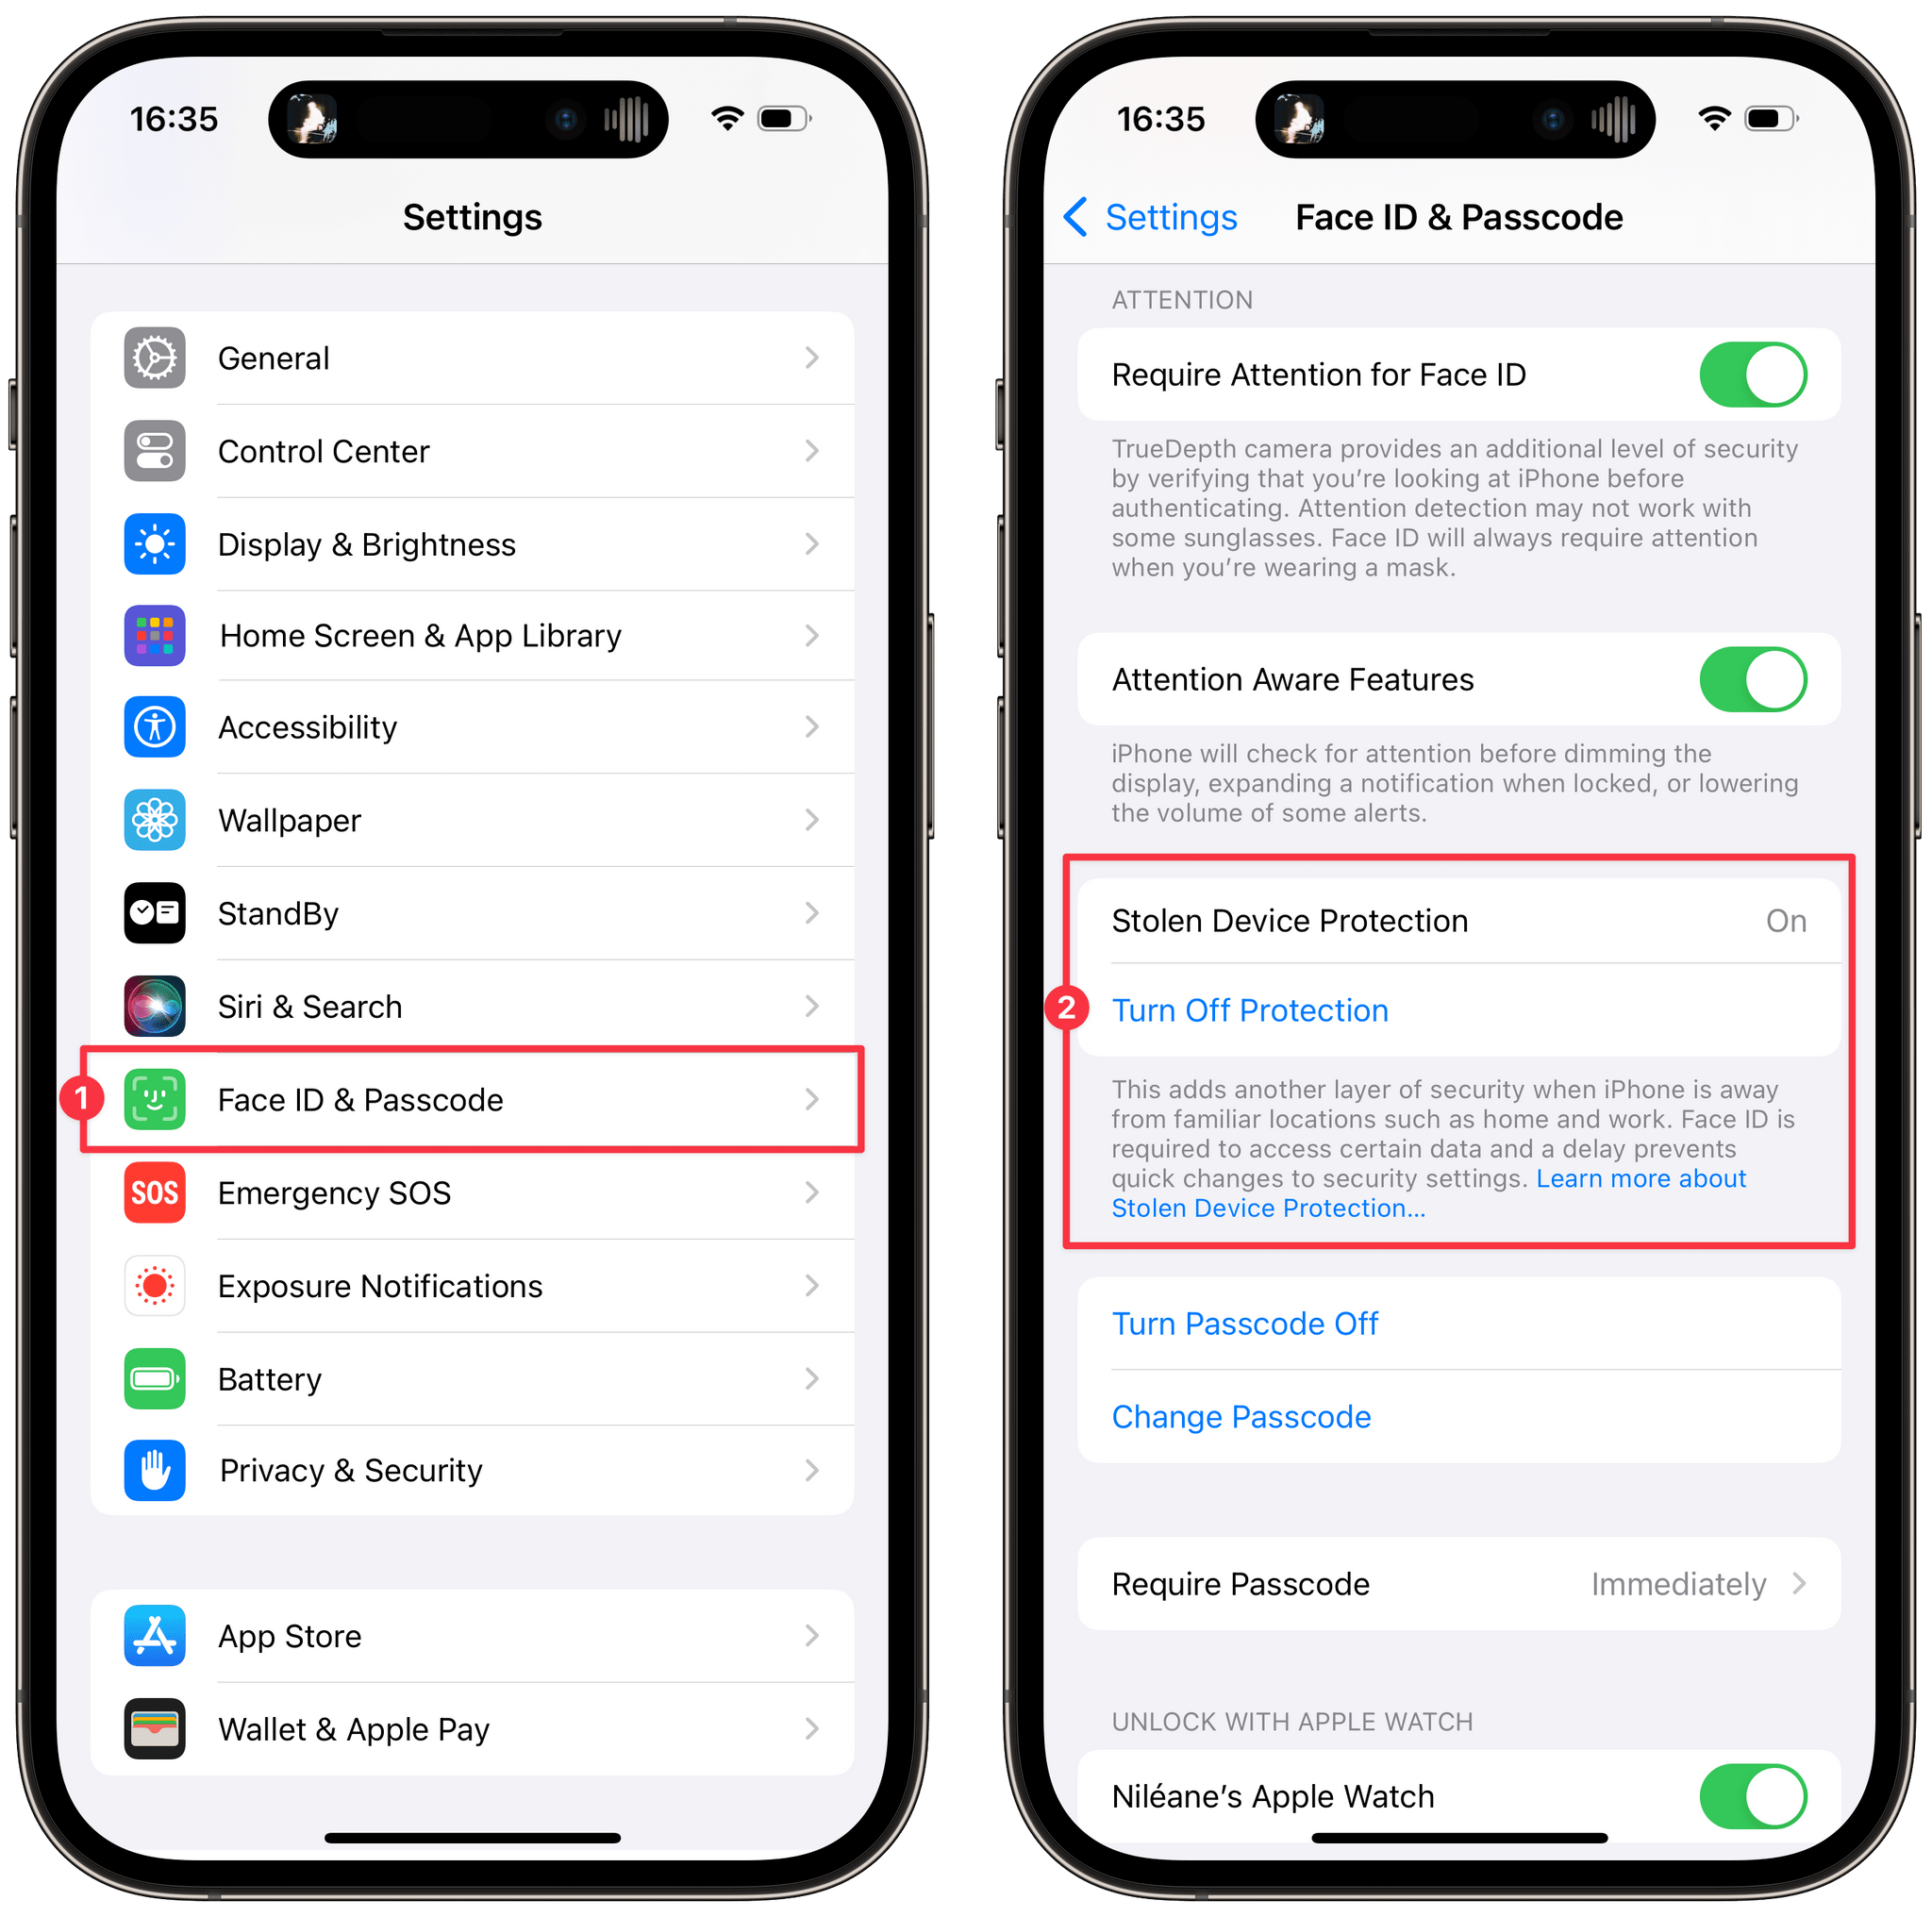 To turn on Stolen Device Protection in Settings, navigate to 'Face ID & Passcode' (1), scroll down to 'Stolen Device Protection', then tap 'Turn On Protection' (2).